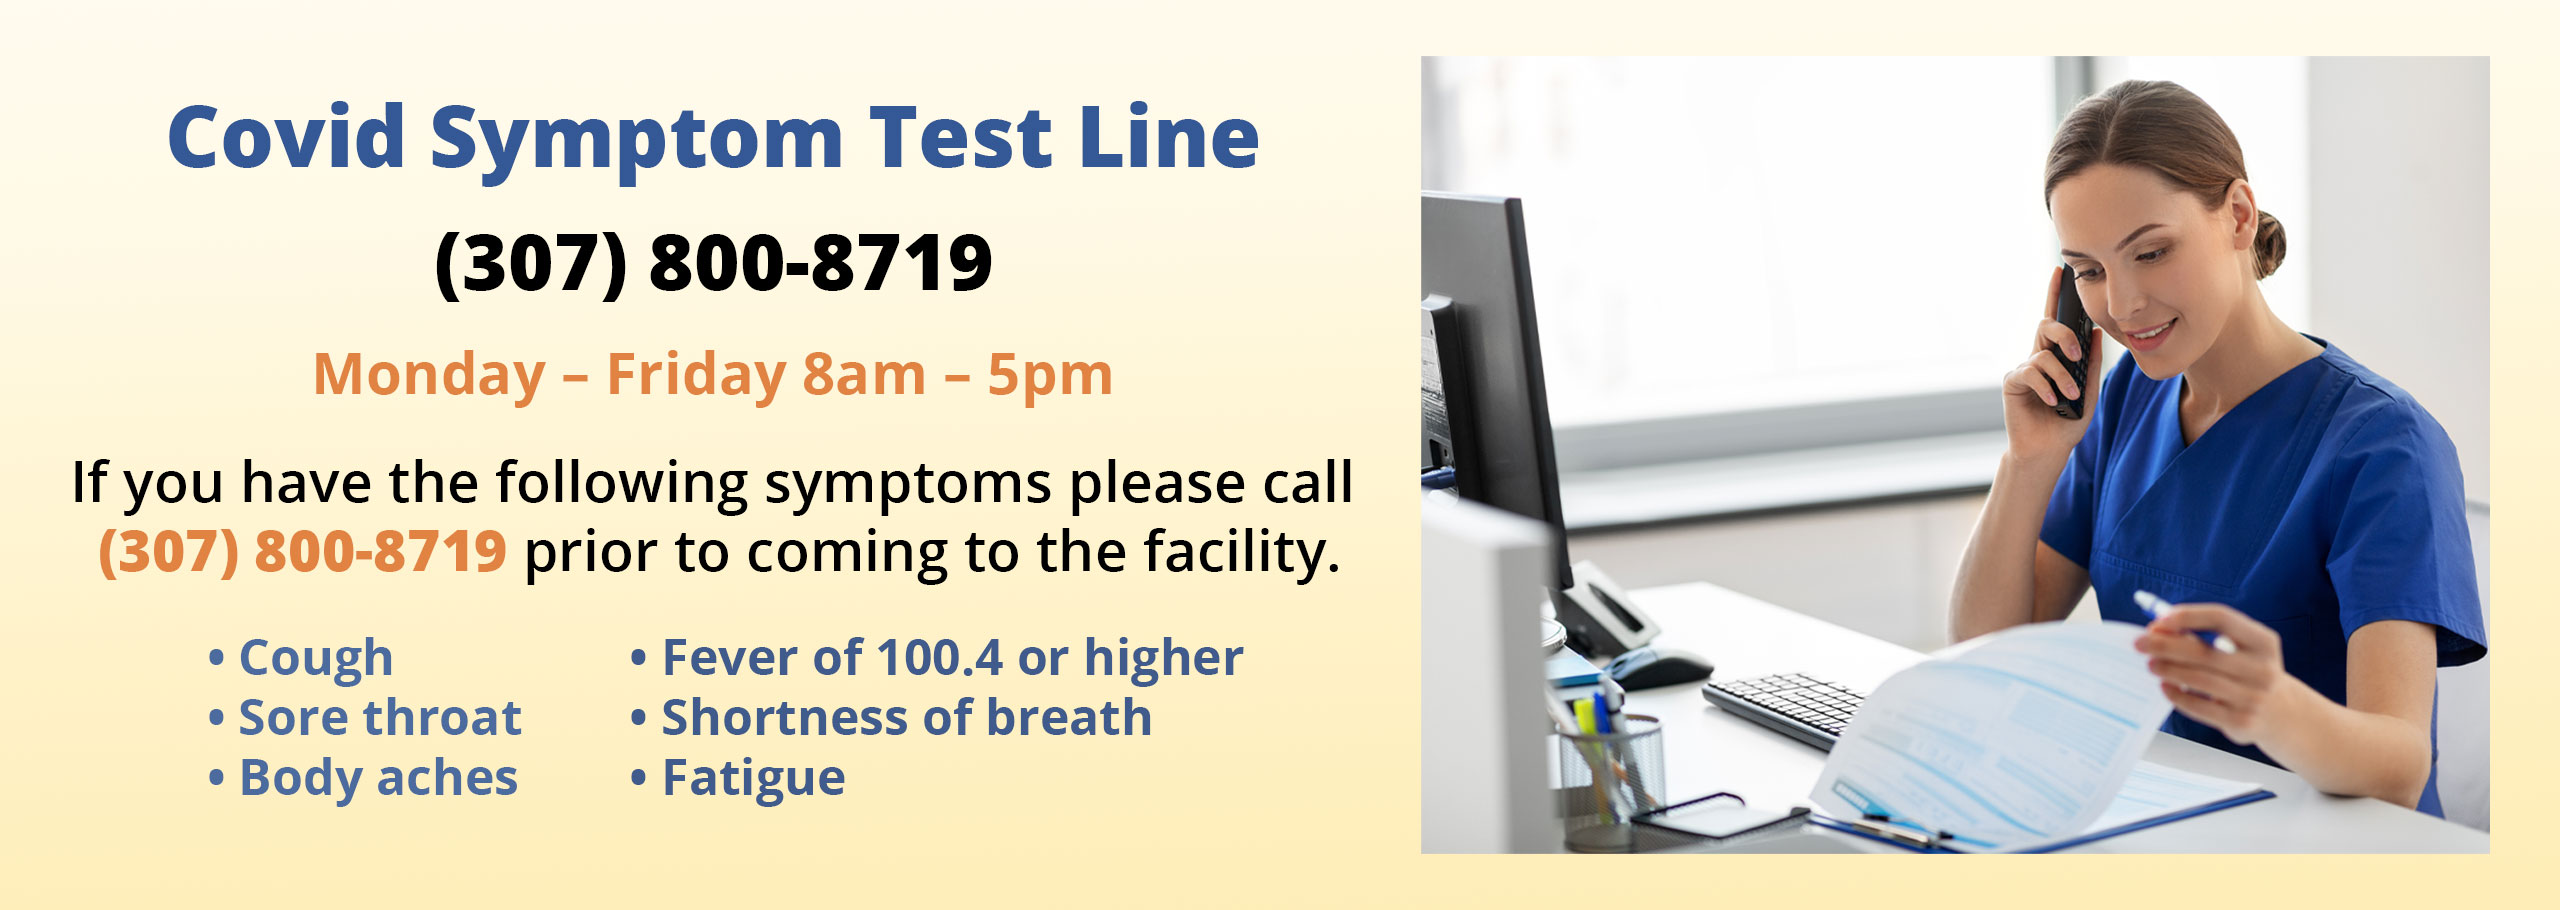 Banner Picture that says:
COVID Symptom Line
(307) 800-8719
Monday-Saturday 8:00 am- 8:00 pm
If you have the following symptoms please call (307) 800-8719 prior to coming to the facility
-Cough -Sore throat -Body aches -Fever of 100.4 or higher -Shortness of breath -Fatigue